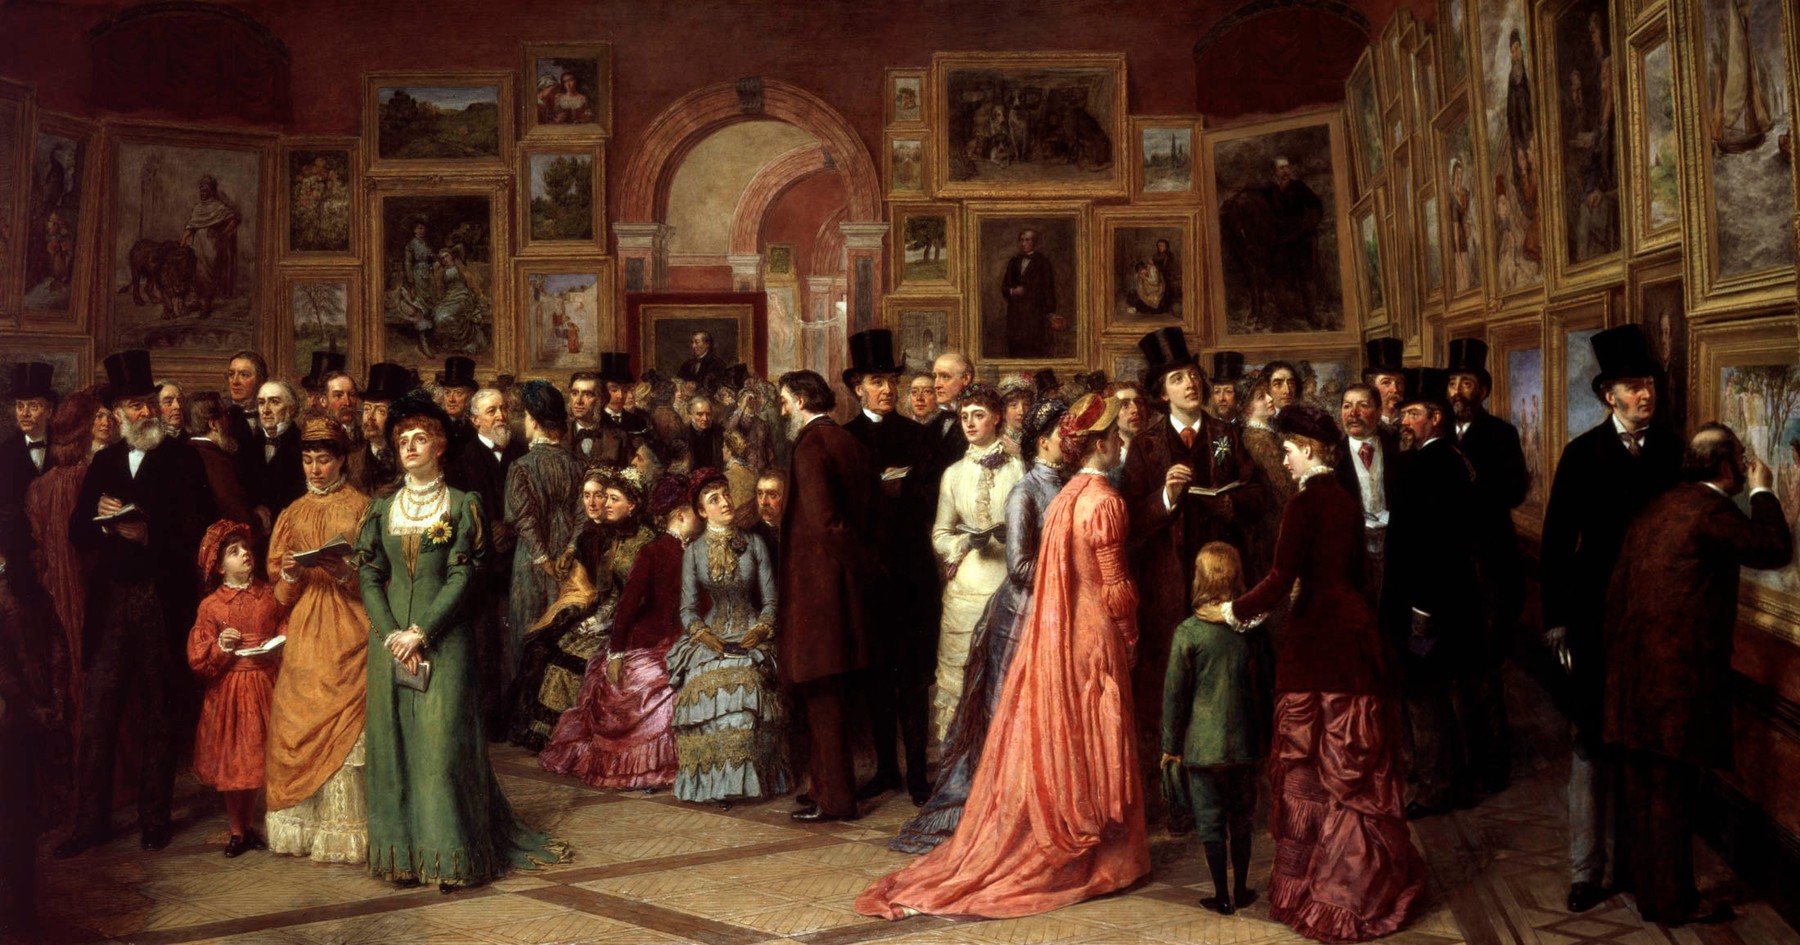 A Private View at the Royal Academy, 1881